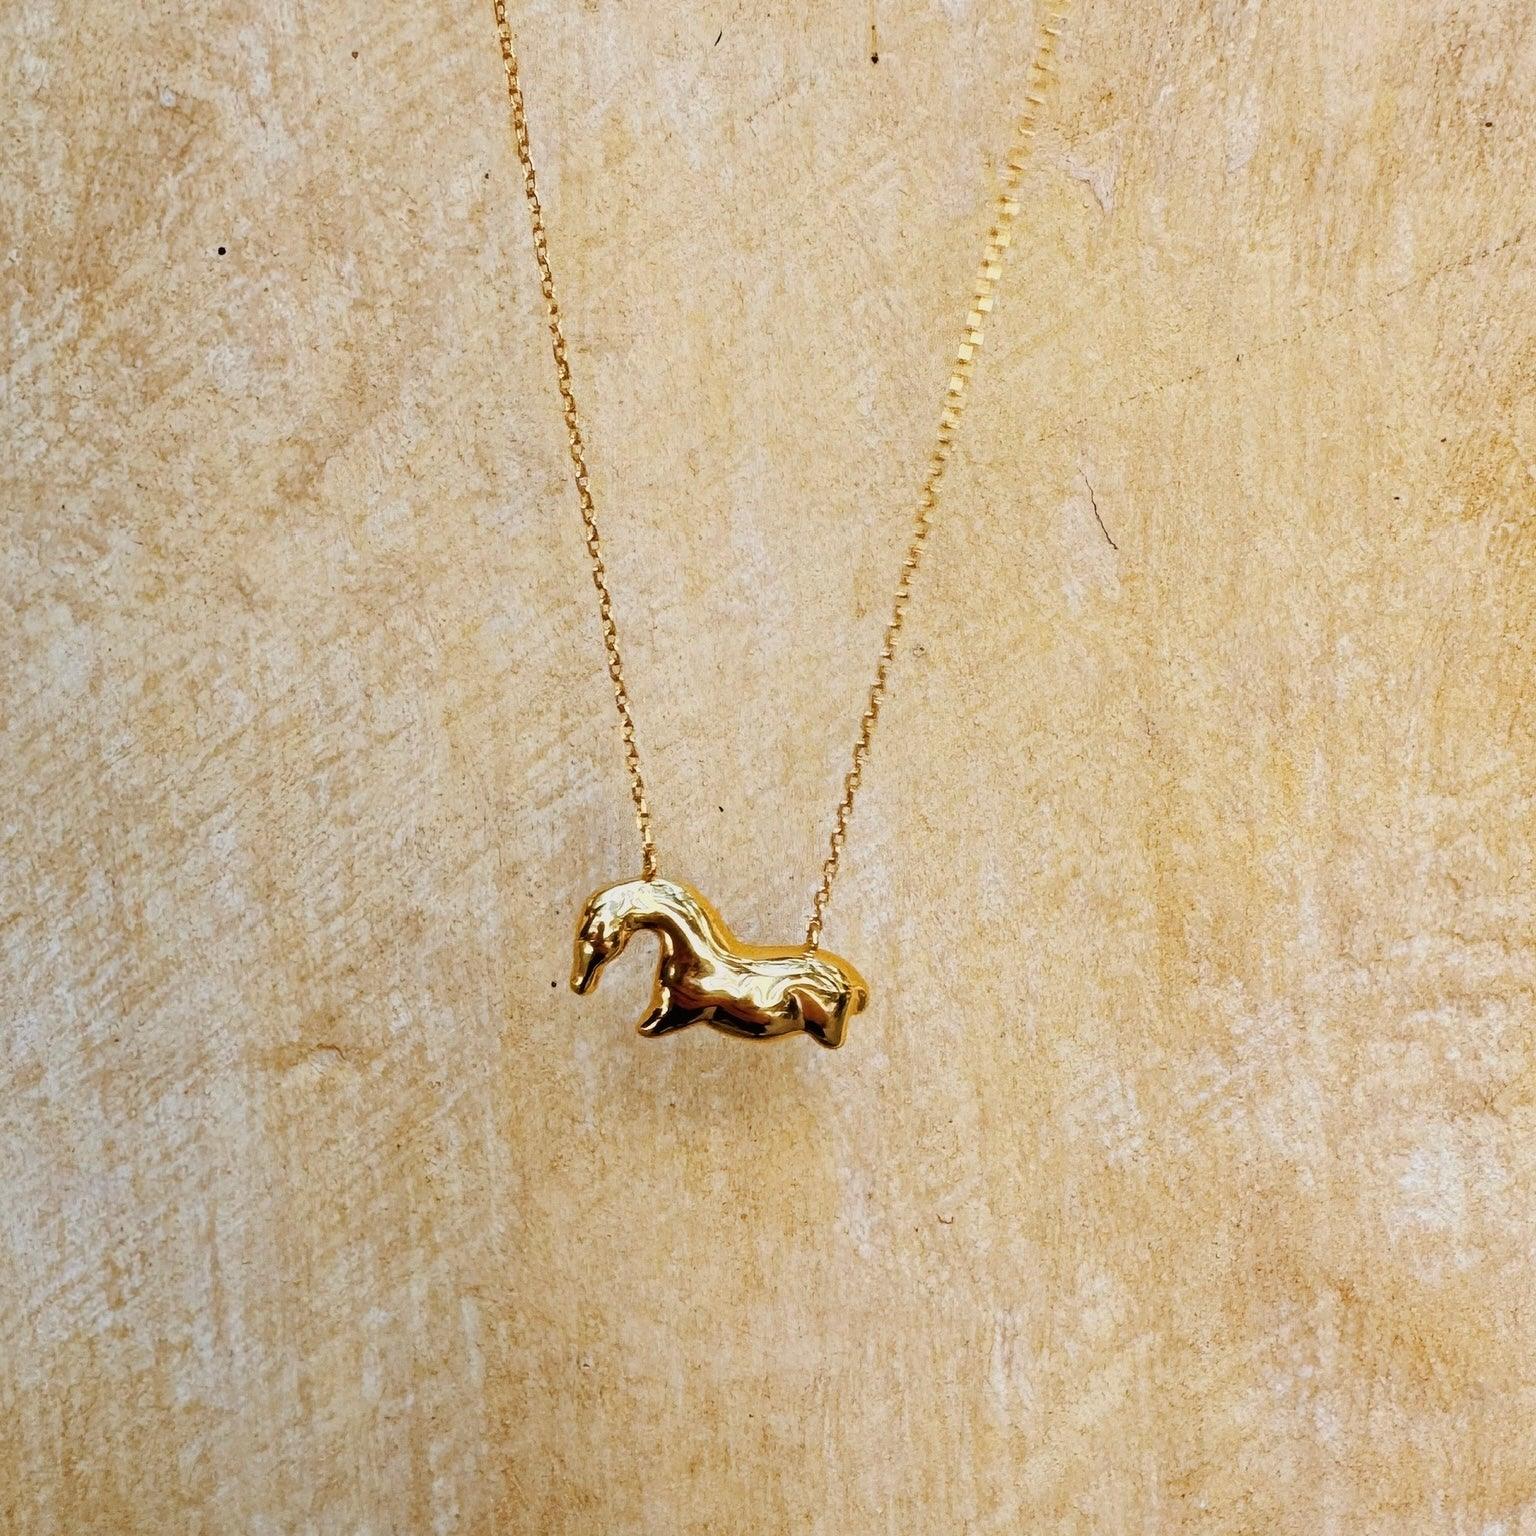 Buy 14K Gold Horse Pendant, Dainty Gold Necklace, Minimalist Gift for Her,  Good Luck Symbol, Lucky Charm, Graduation Gift, Solid Gold Necklace Online  in India - Etsy